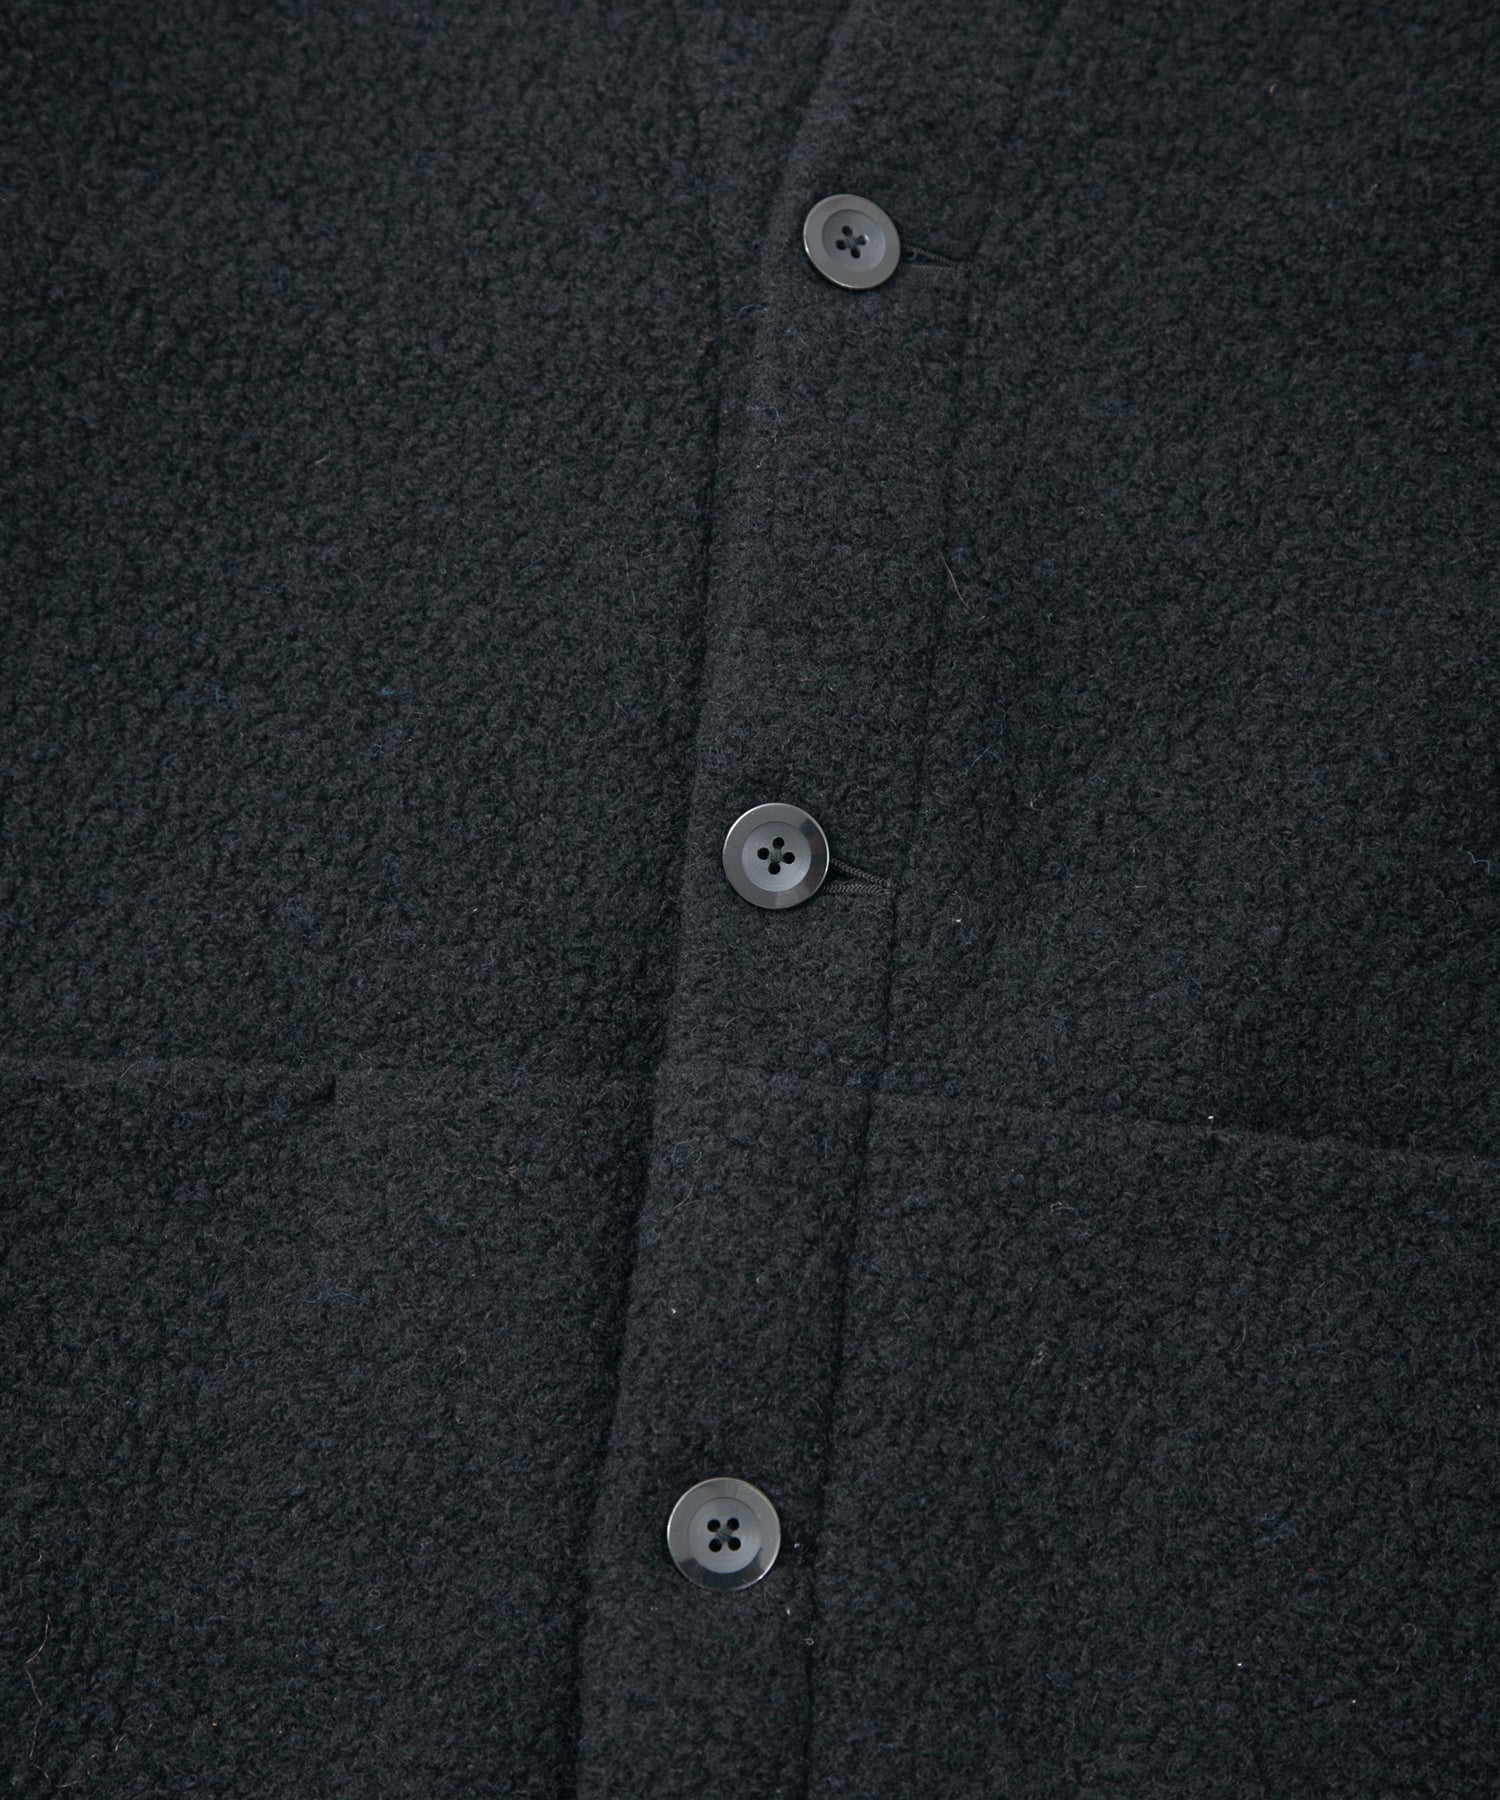 Load image into Gallery viewer, Recycled Wool Teddy Fleece Long Cardigan - BLACK